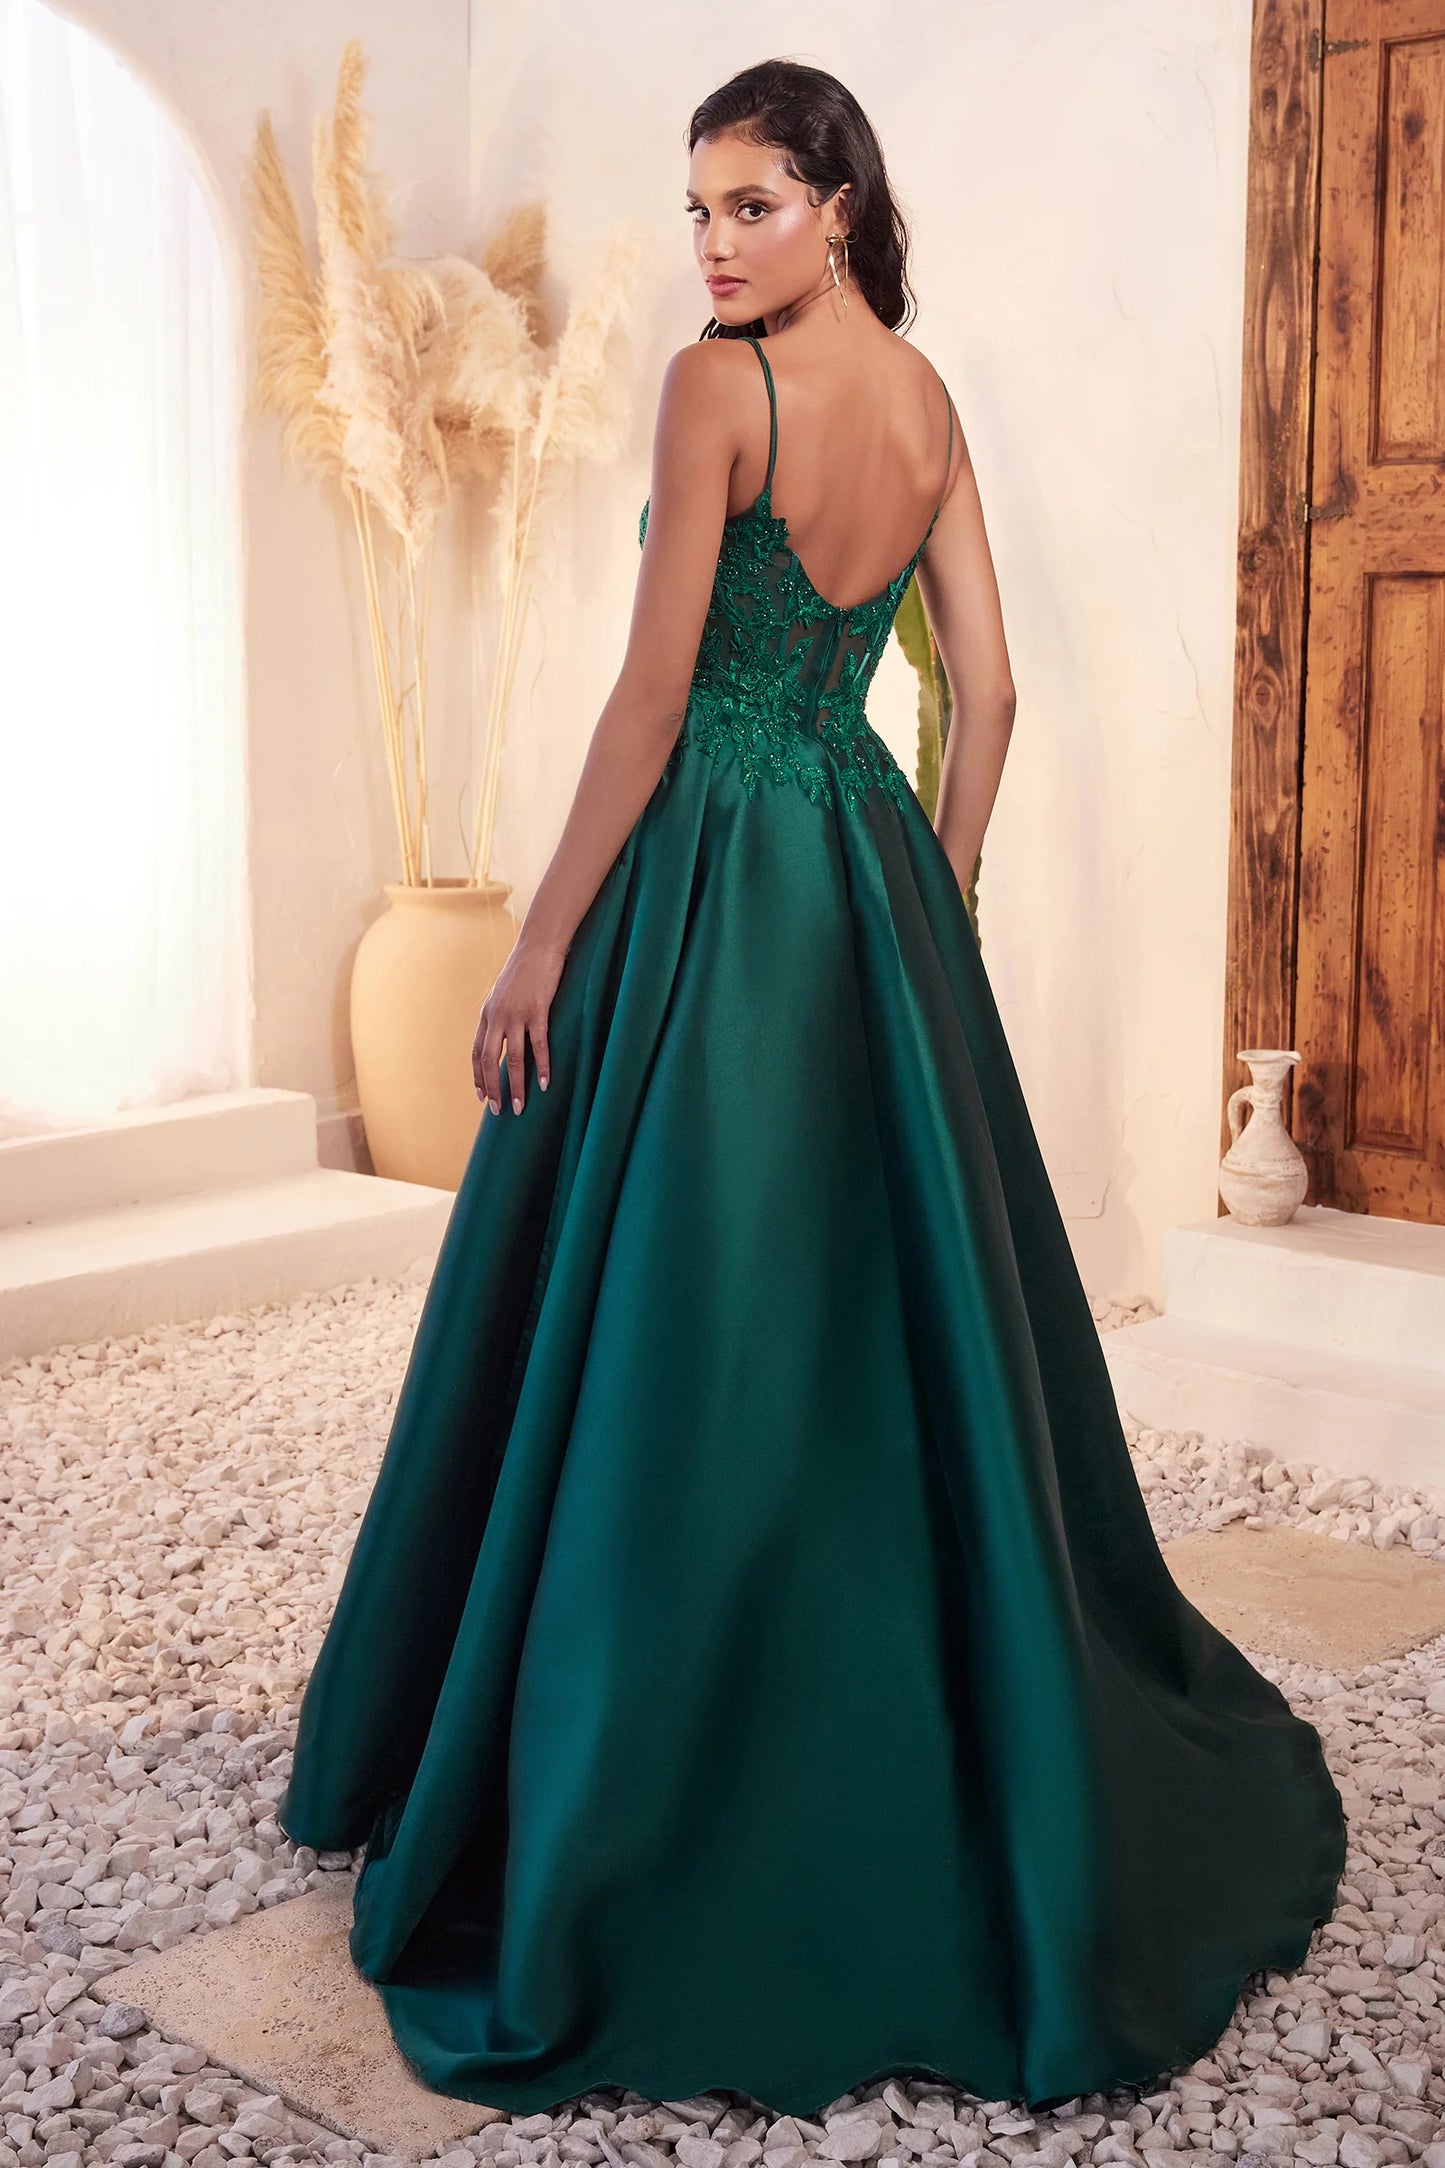 CD24-C145 MIKADO EMERALD BALL GOWN WITH LACE DETAILS